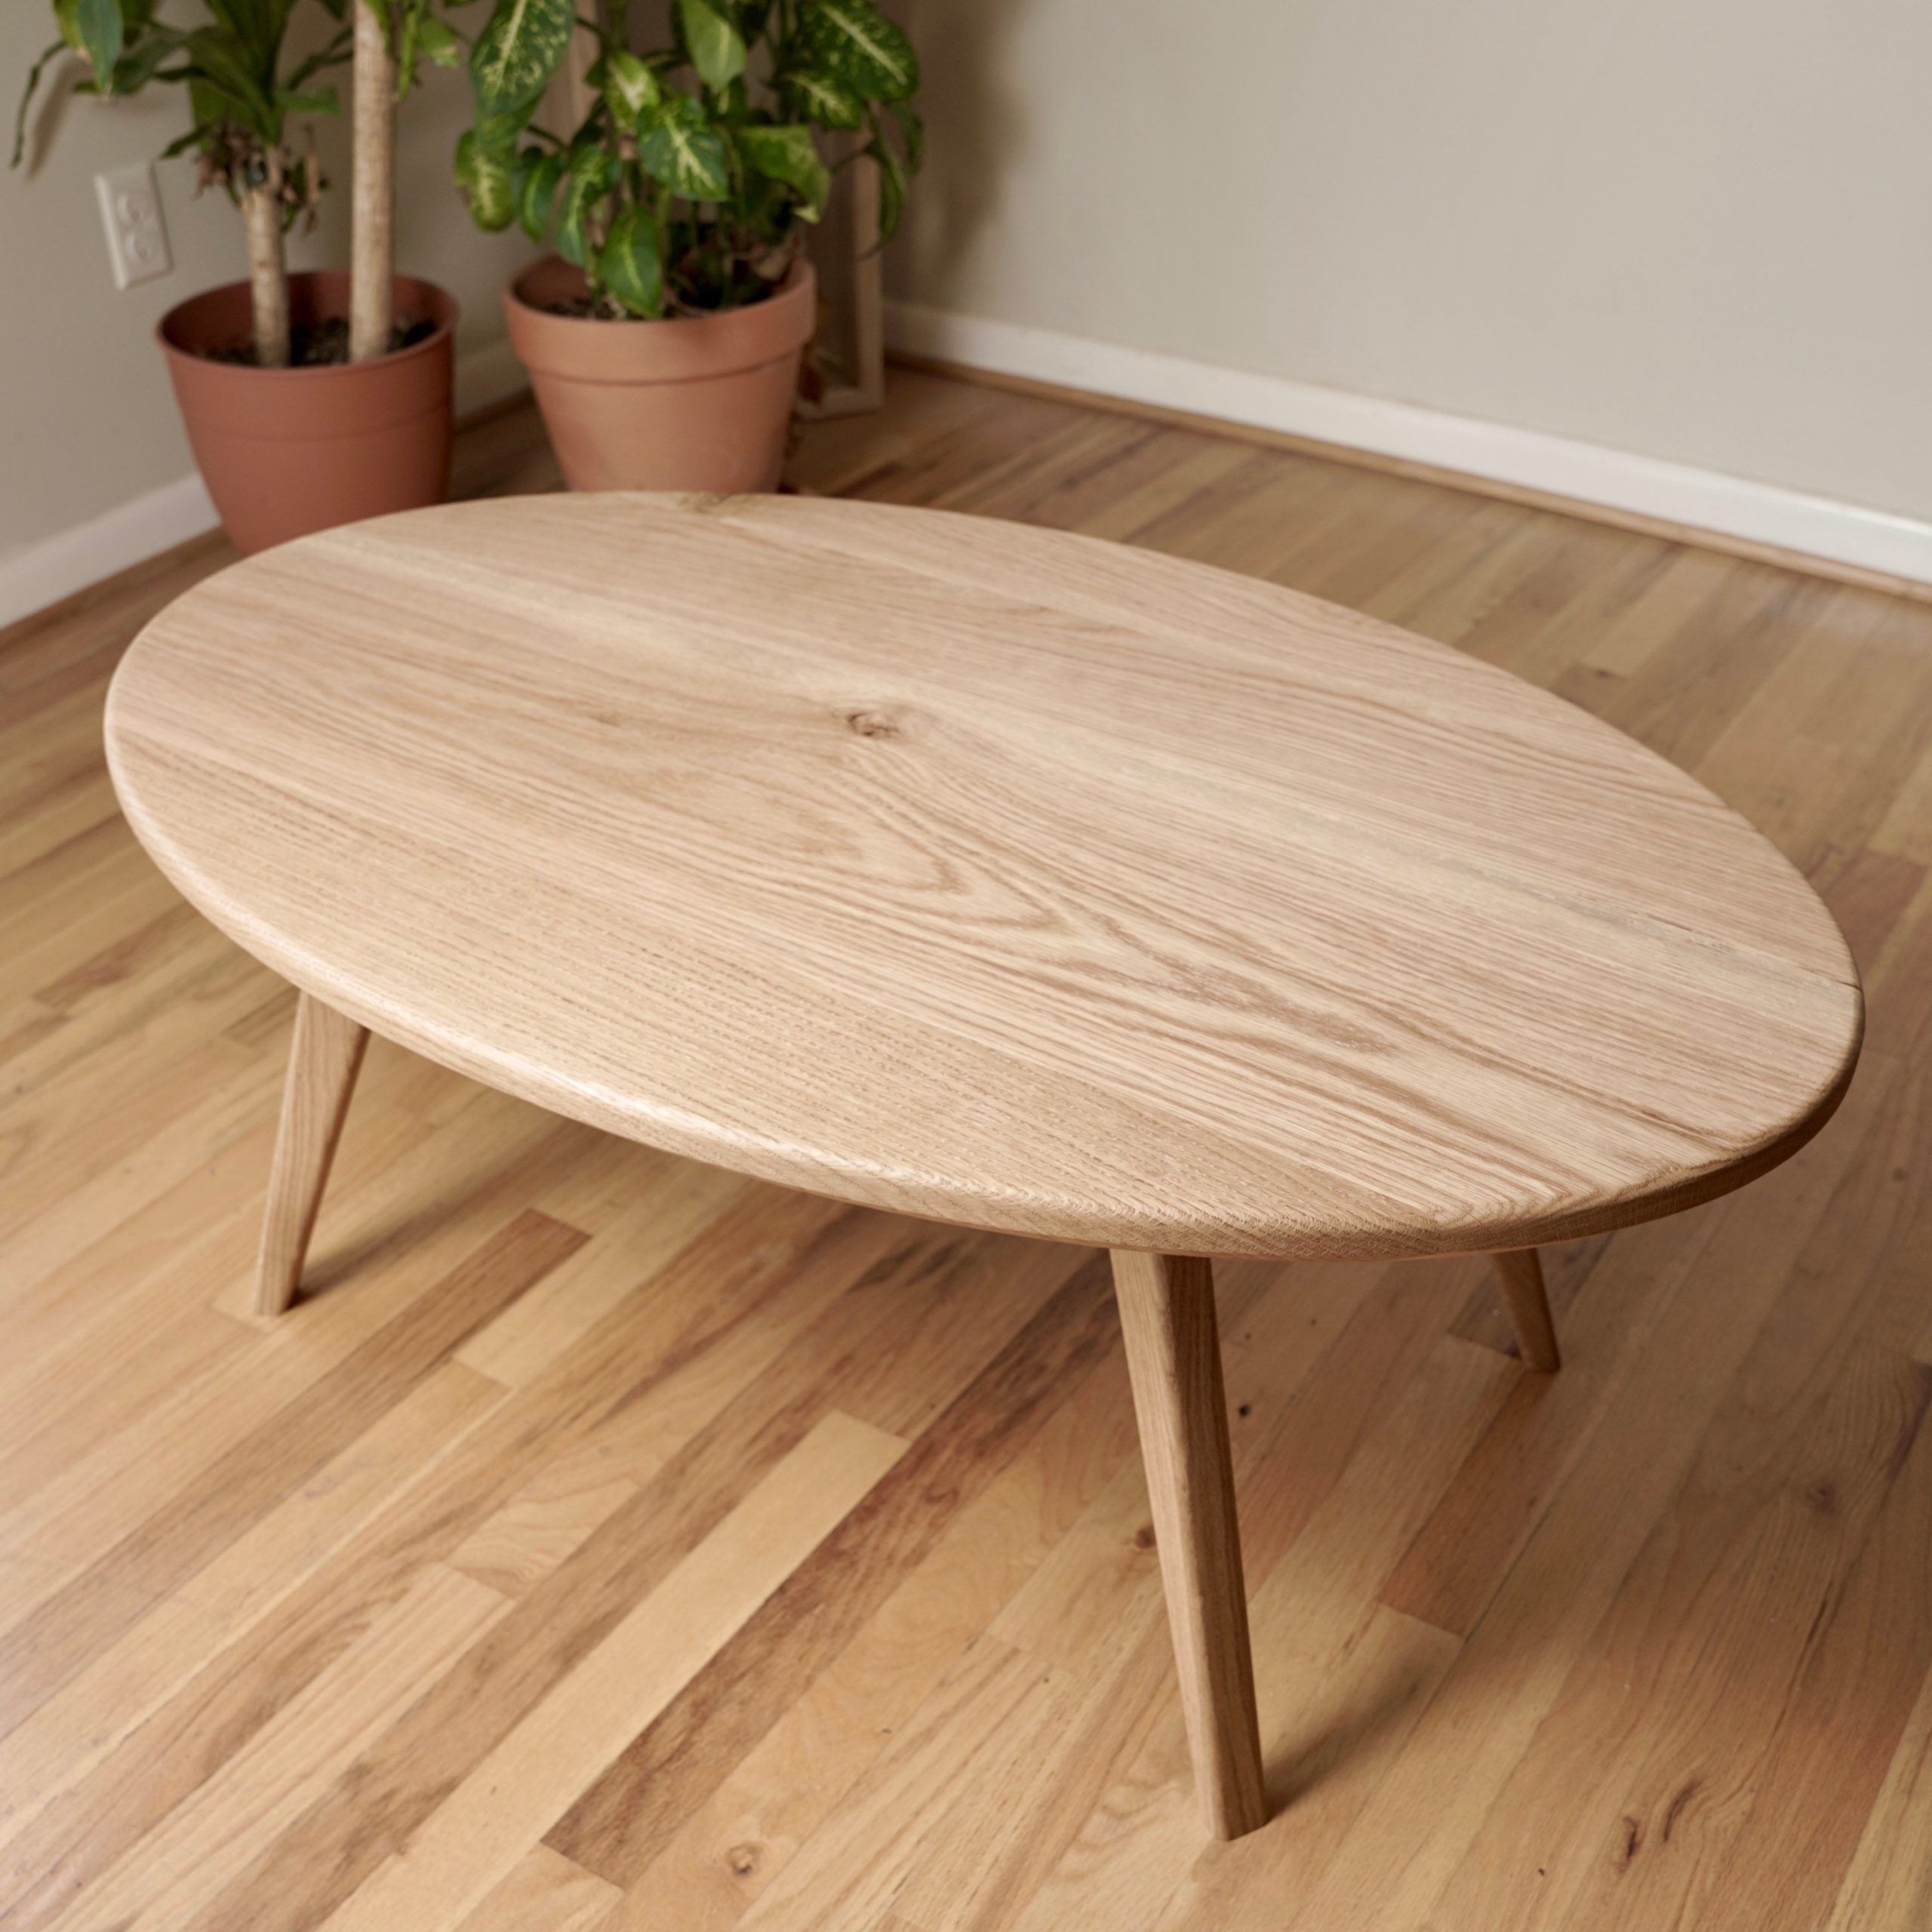 Oval Scandinavian Coffee Table – Etsy For Scandinavian Coffee Tables (View 11 of 15)